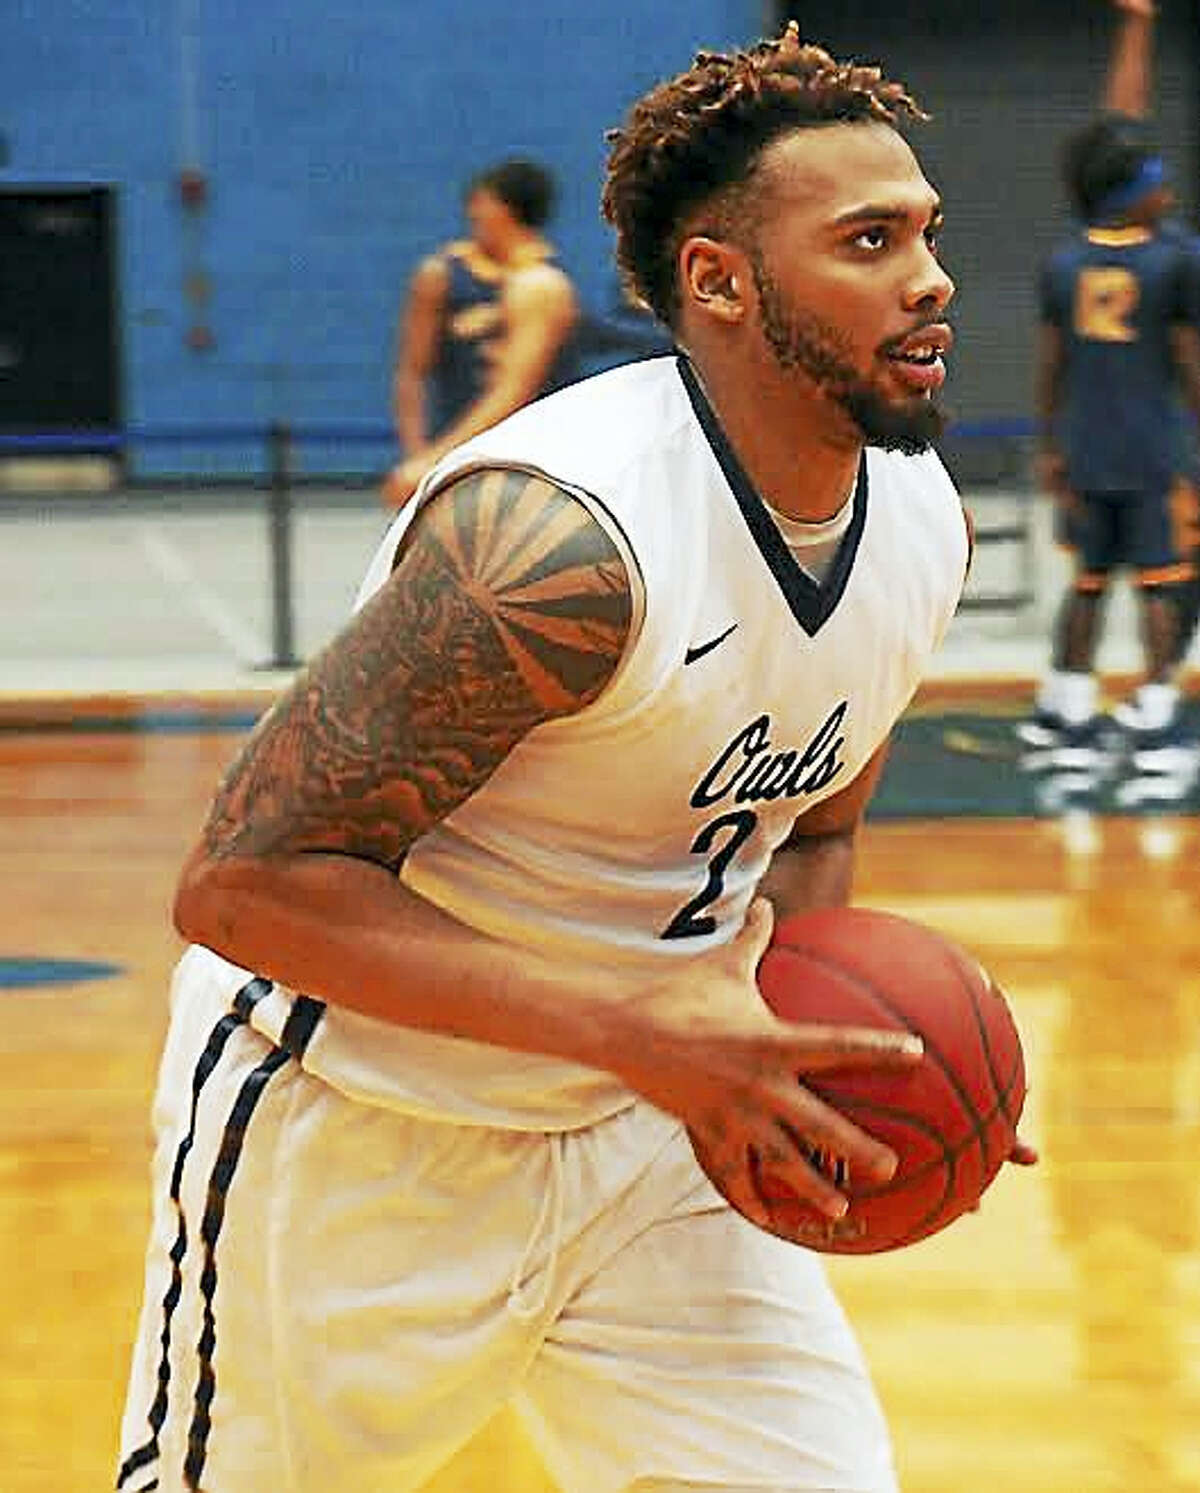 Kayjuan Bynum is averaging 4.5 points off the bench while providing leadership and toughness for SCSU men’s basketball team.